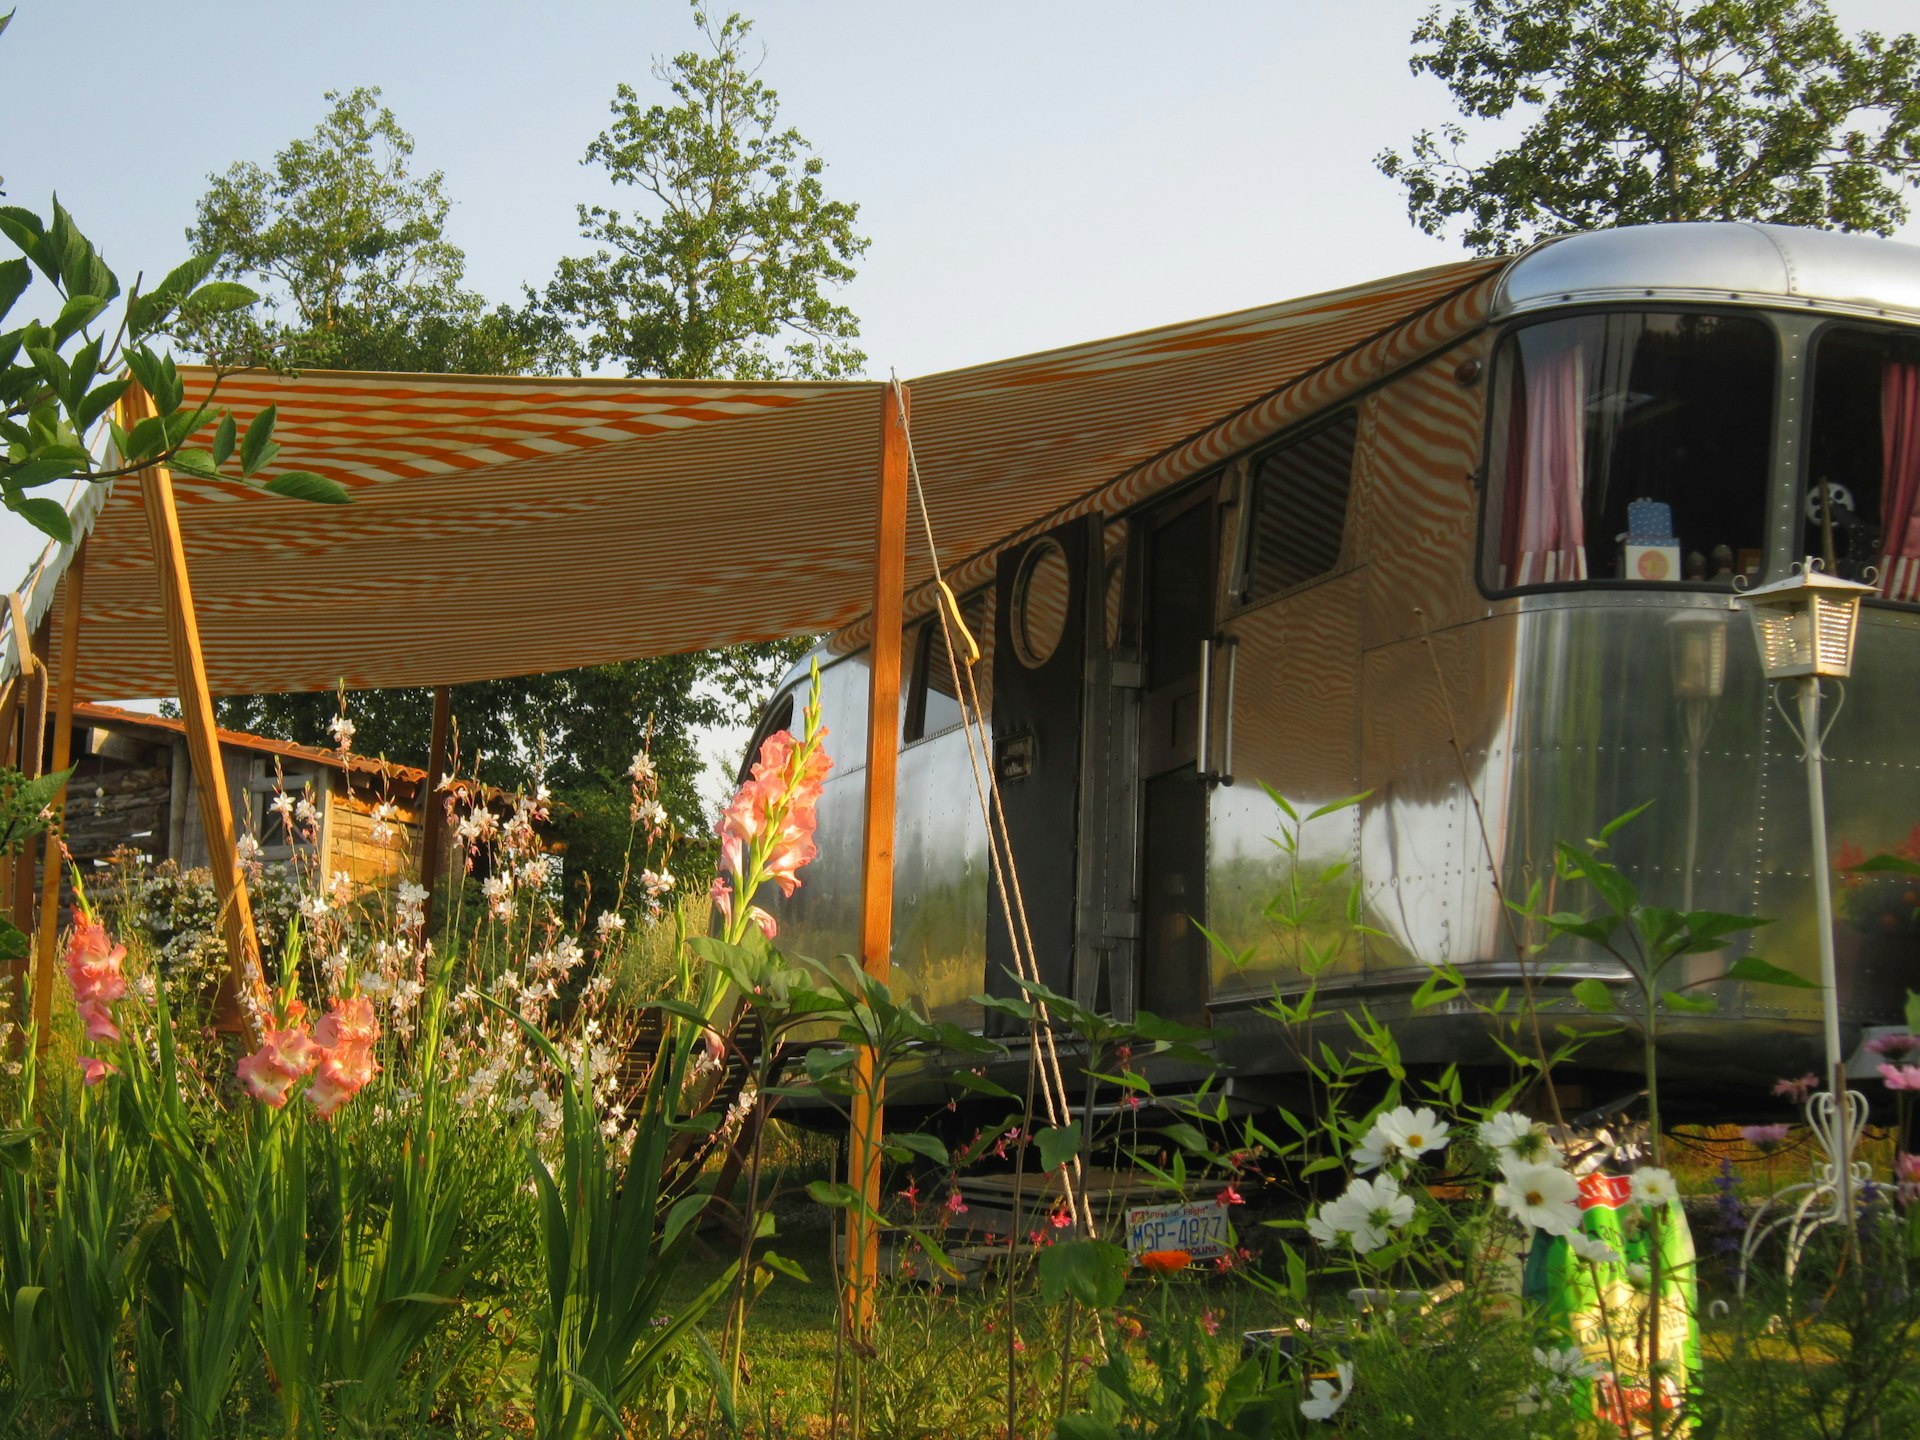 A silver Airstream camper with a white and orange striped awning extended from the left side sits in a garden patch of wildflowers and coral-colored gladiolas. In the background a wooden bath house adds to the rustic charm. 